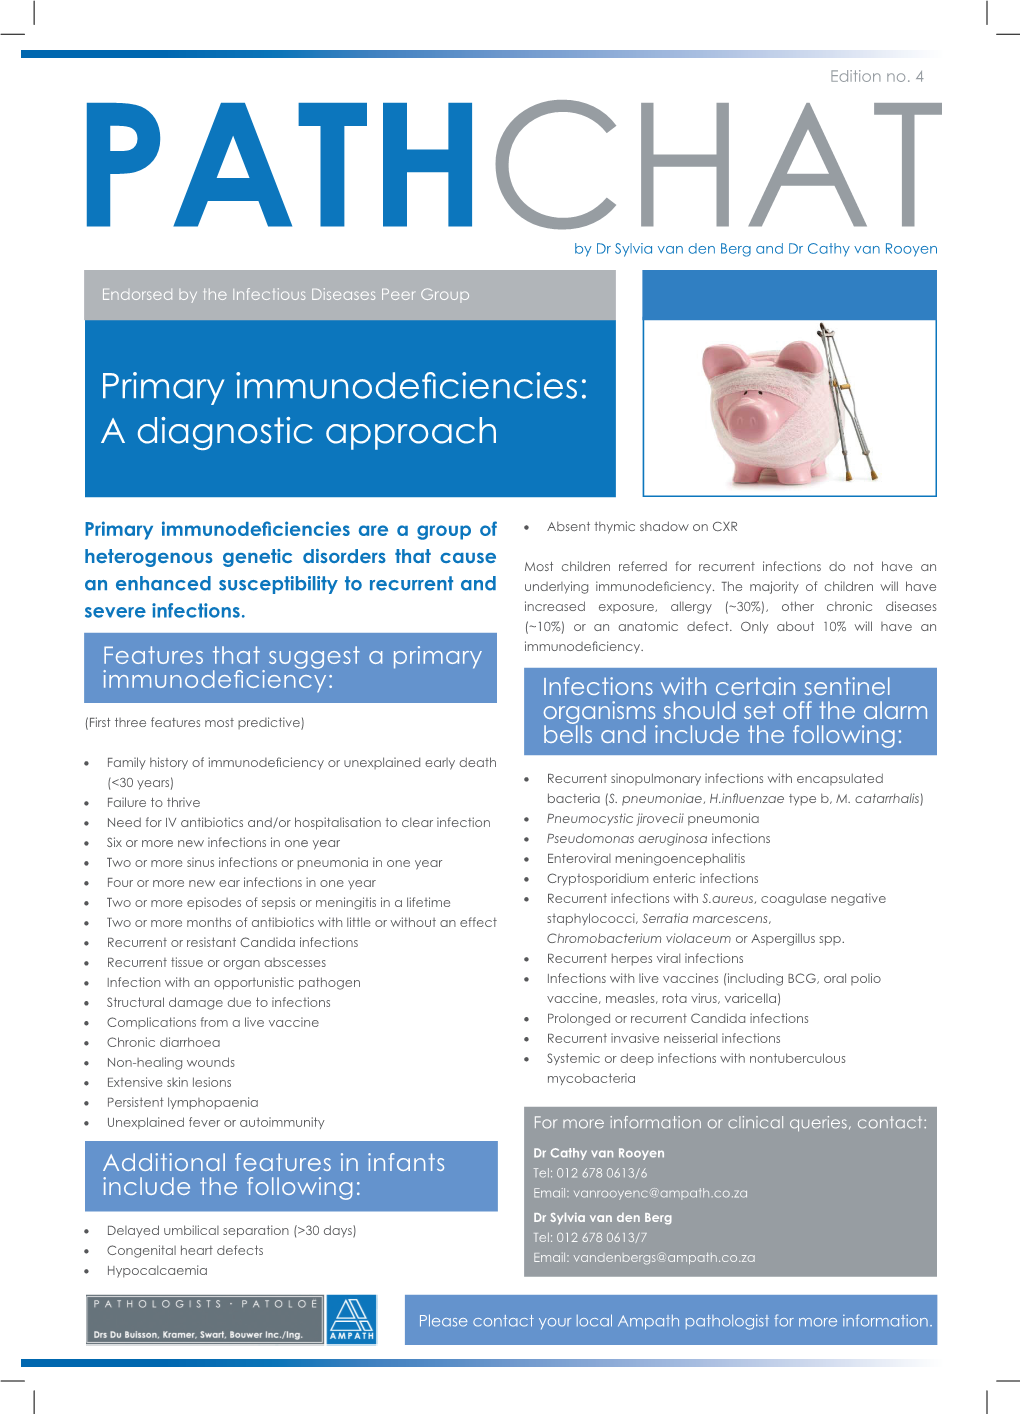 Primary Immunodeficiencies: a Diagnostic Approach